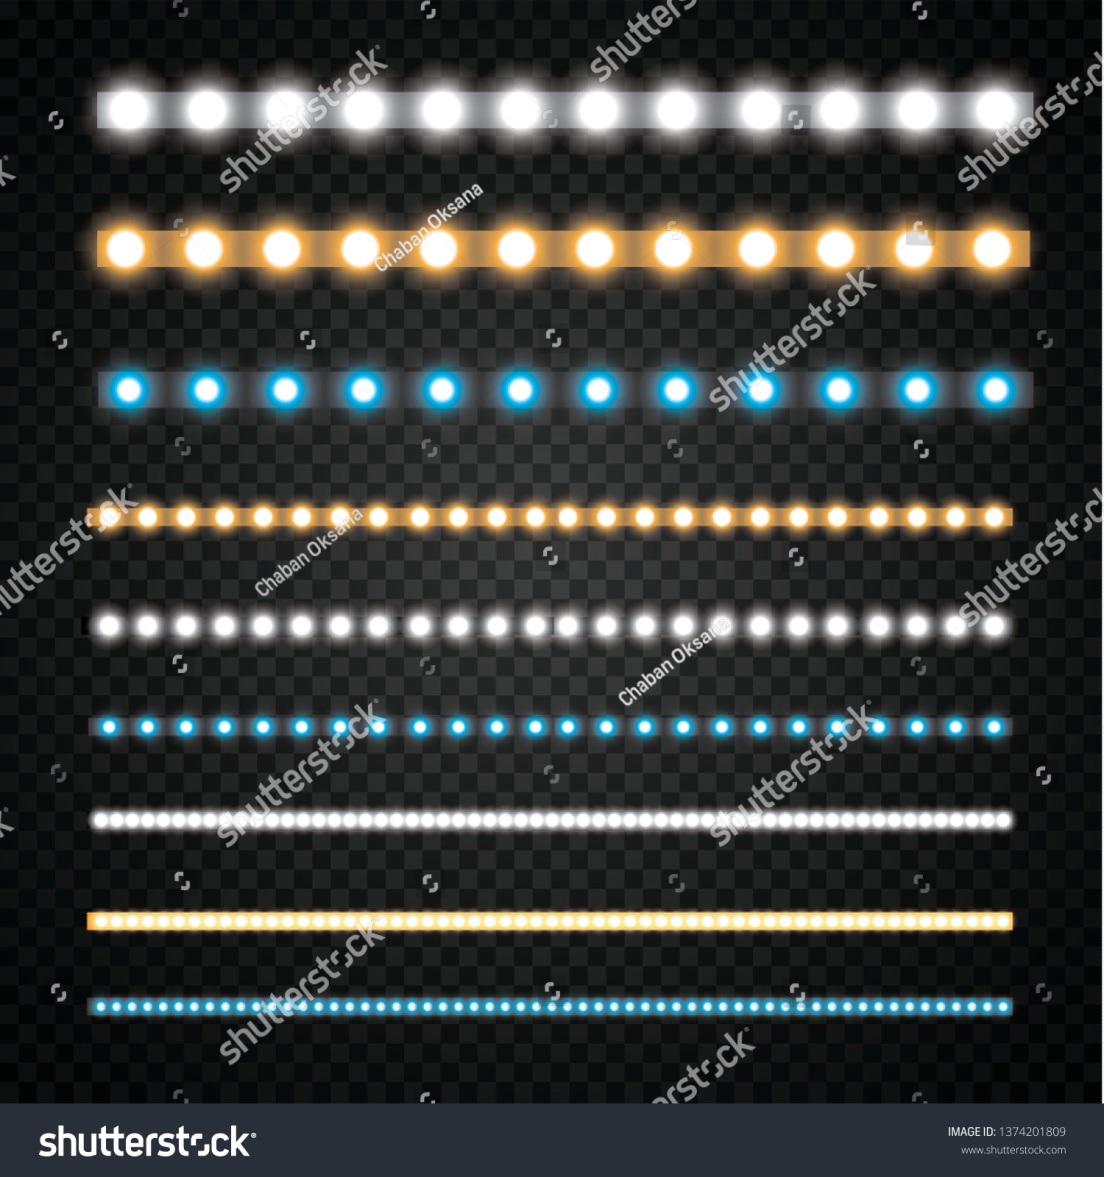 stock-vector-various-led-stripes-on-a-black-and-transparent-background-glowing-led-garlands-1374201809.jpg